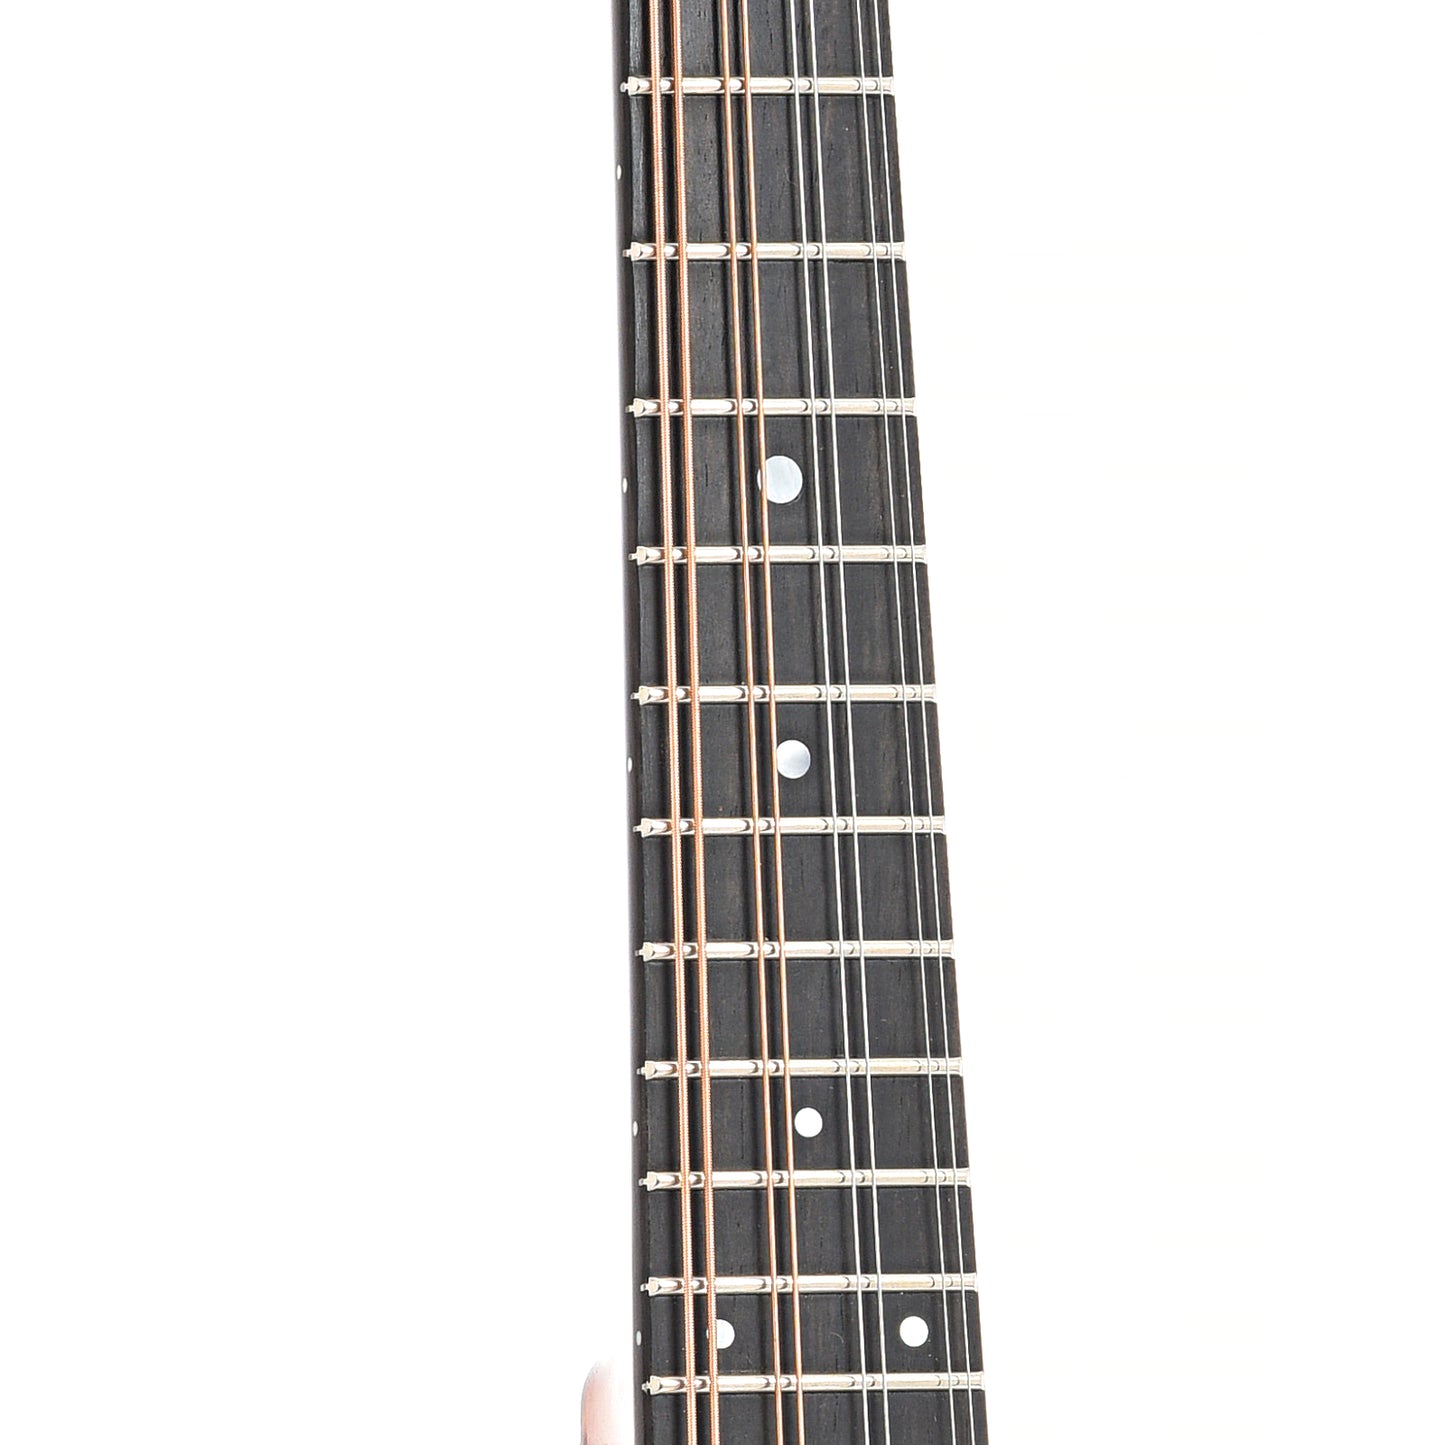 fretboard of Collings MT A-Model Mandolin with Glossy Top, Honey Amber Finish, Tortoise Binding